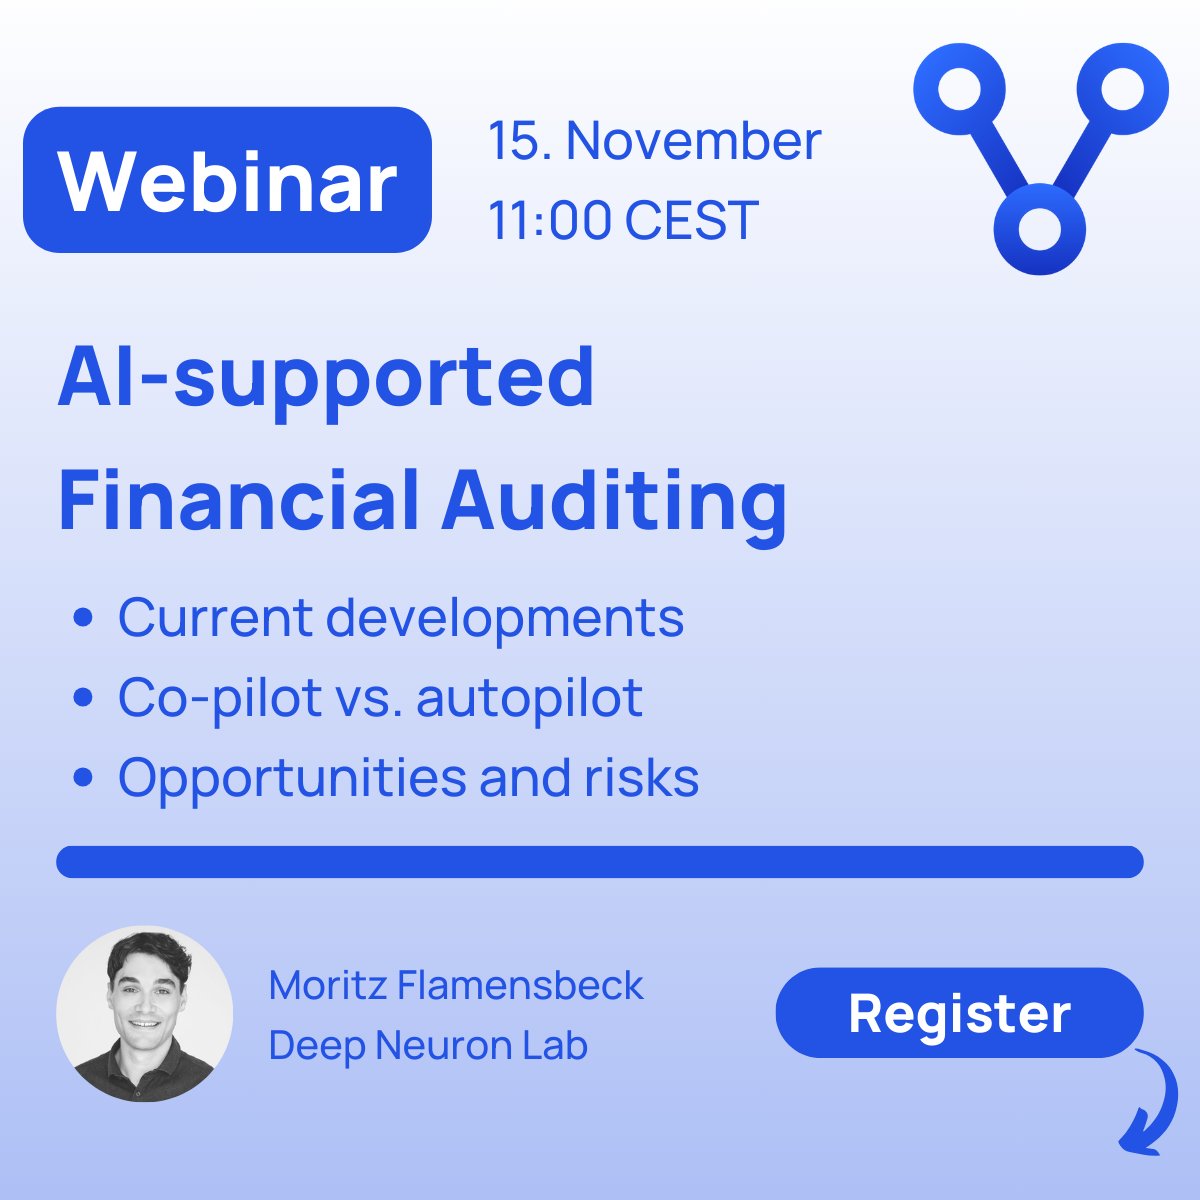 Join us for an enlightening online webinar - 'AI-supported Financial Auditing.' 💻

Save the date and stay tuned for more details. 🗓 

#Audit #Webinar #AI #DigitalAudit #FutureofAuditing